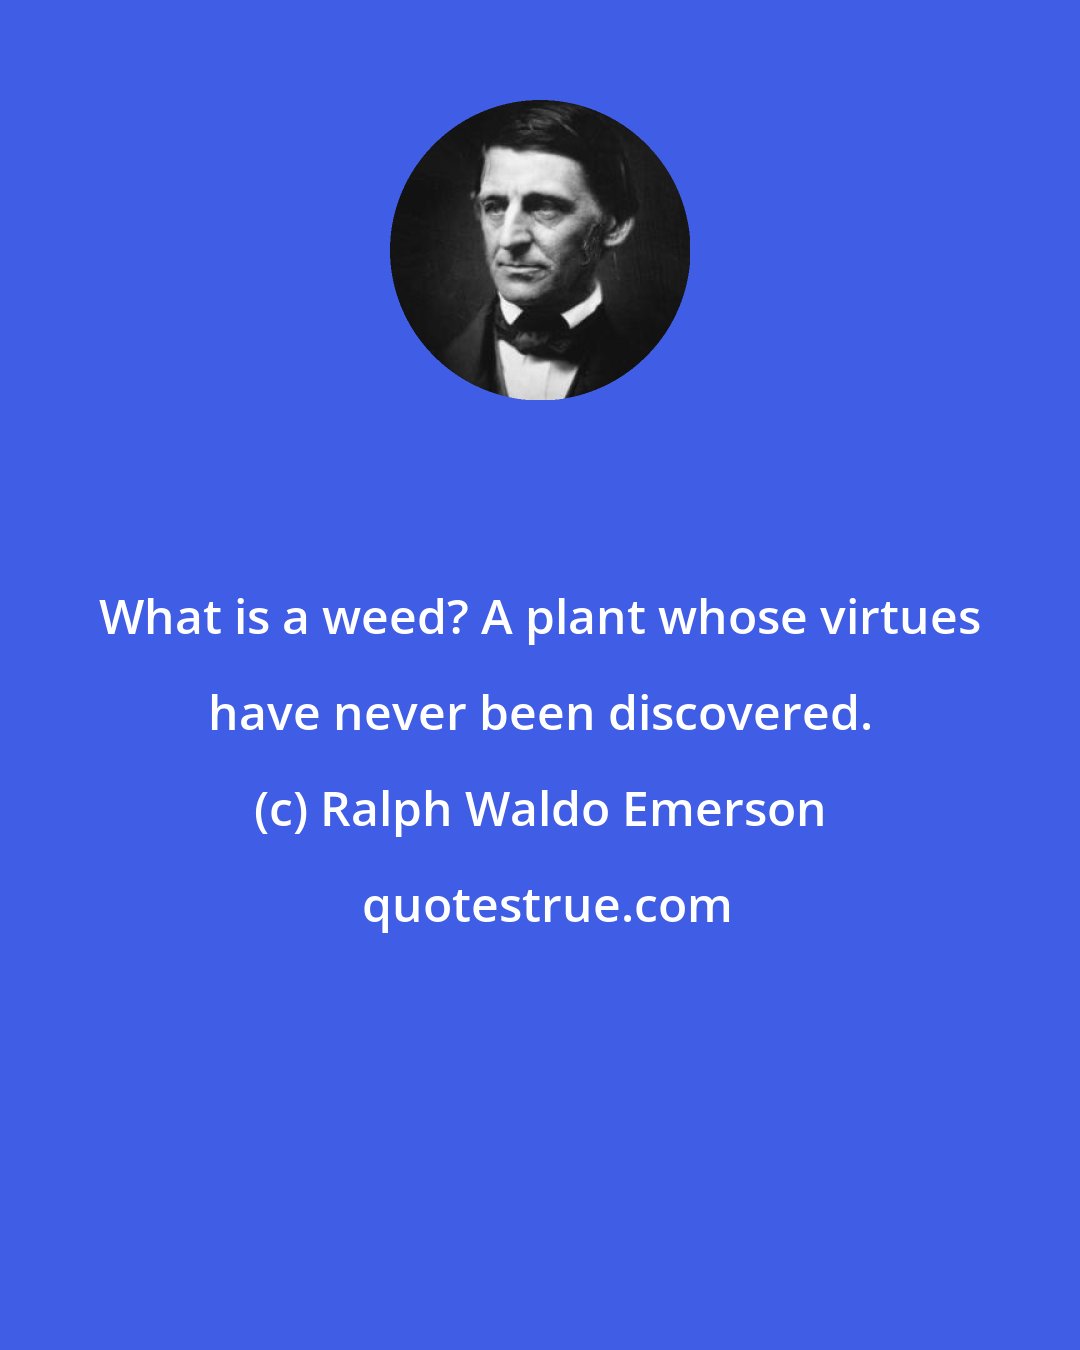 Ralph Waldo Emerson: What is a weed? A plant whose virtues have never been discovered.